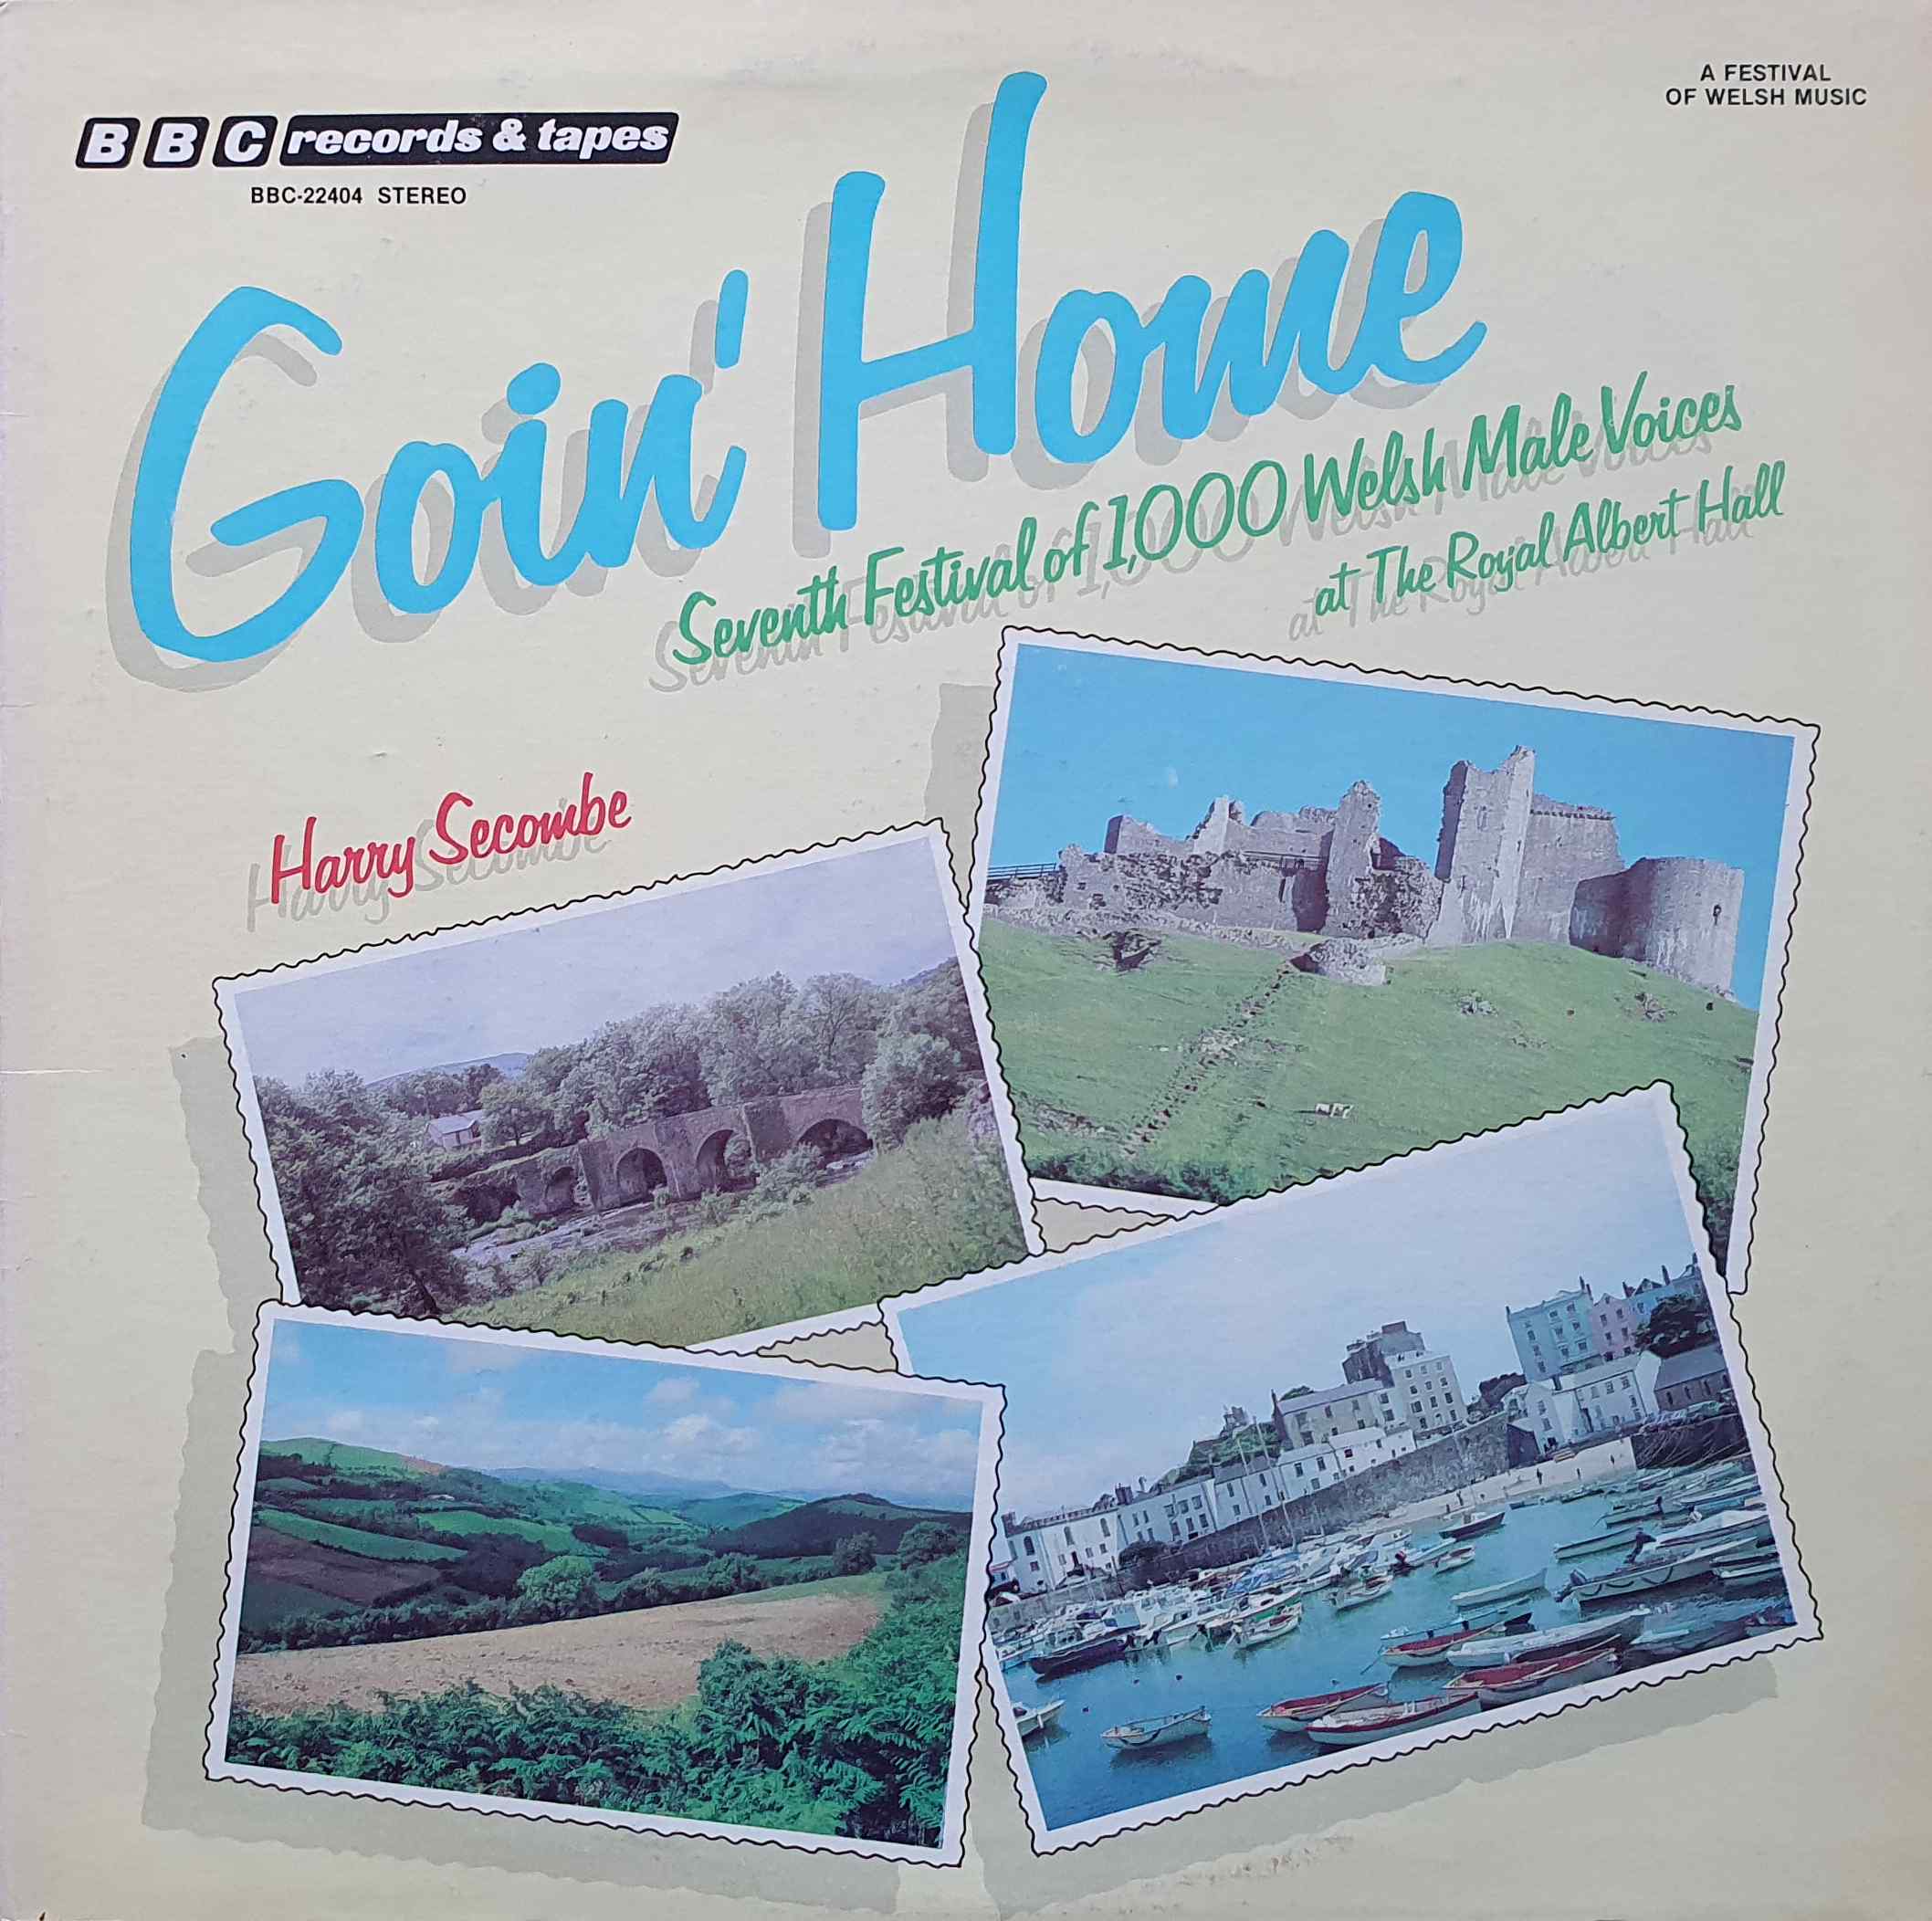 Picture of BBC - 22404 Goin' home - 1000 Welsh male voices by artist Various from the BBC albums - Records and Tapes library